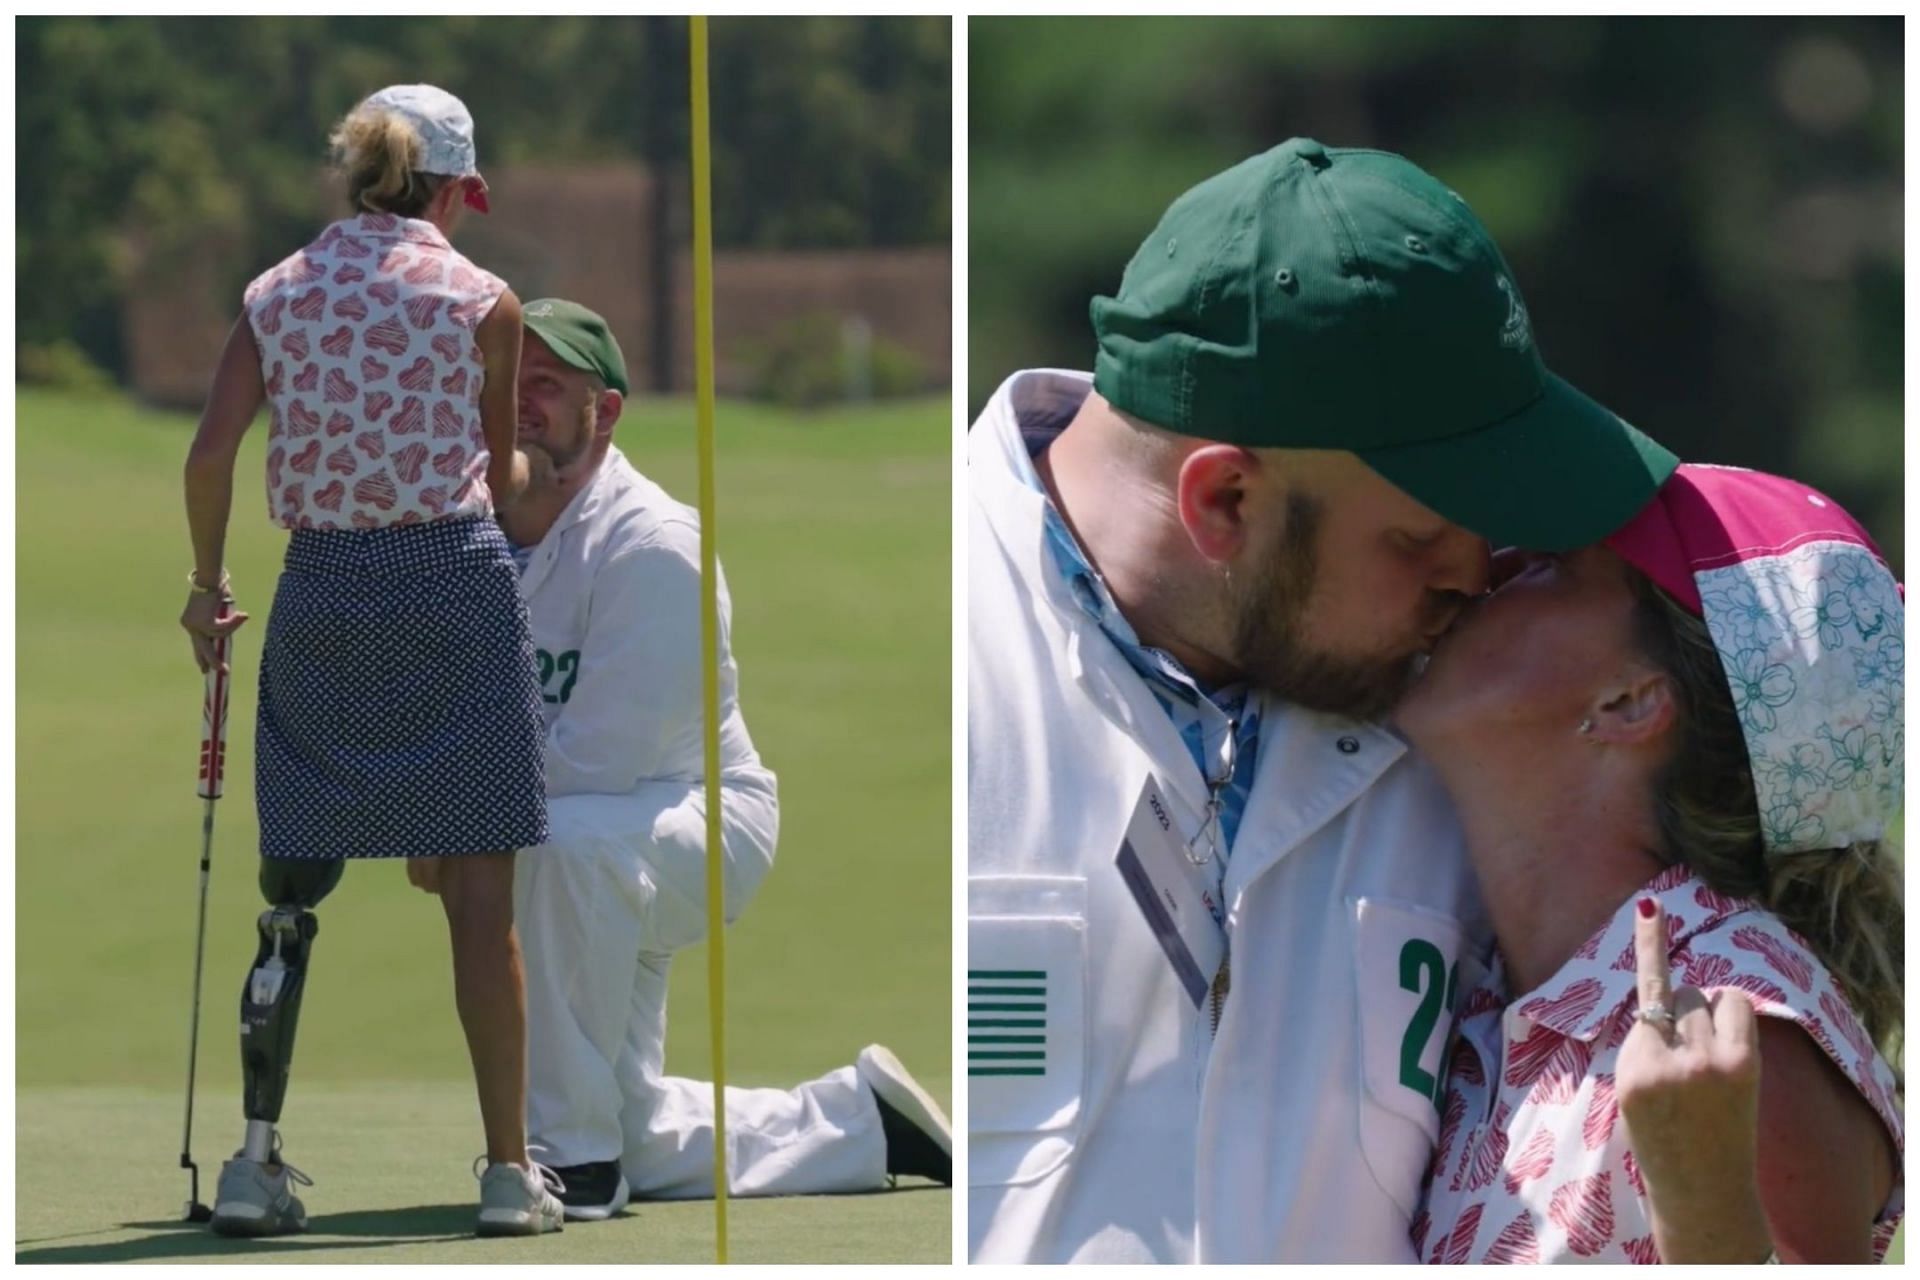 Kelsey Koch got proposed by her caddie, Josh White during the final round of US Adaptive Open (Image Via Twitter.com/USGA)